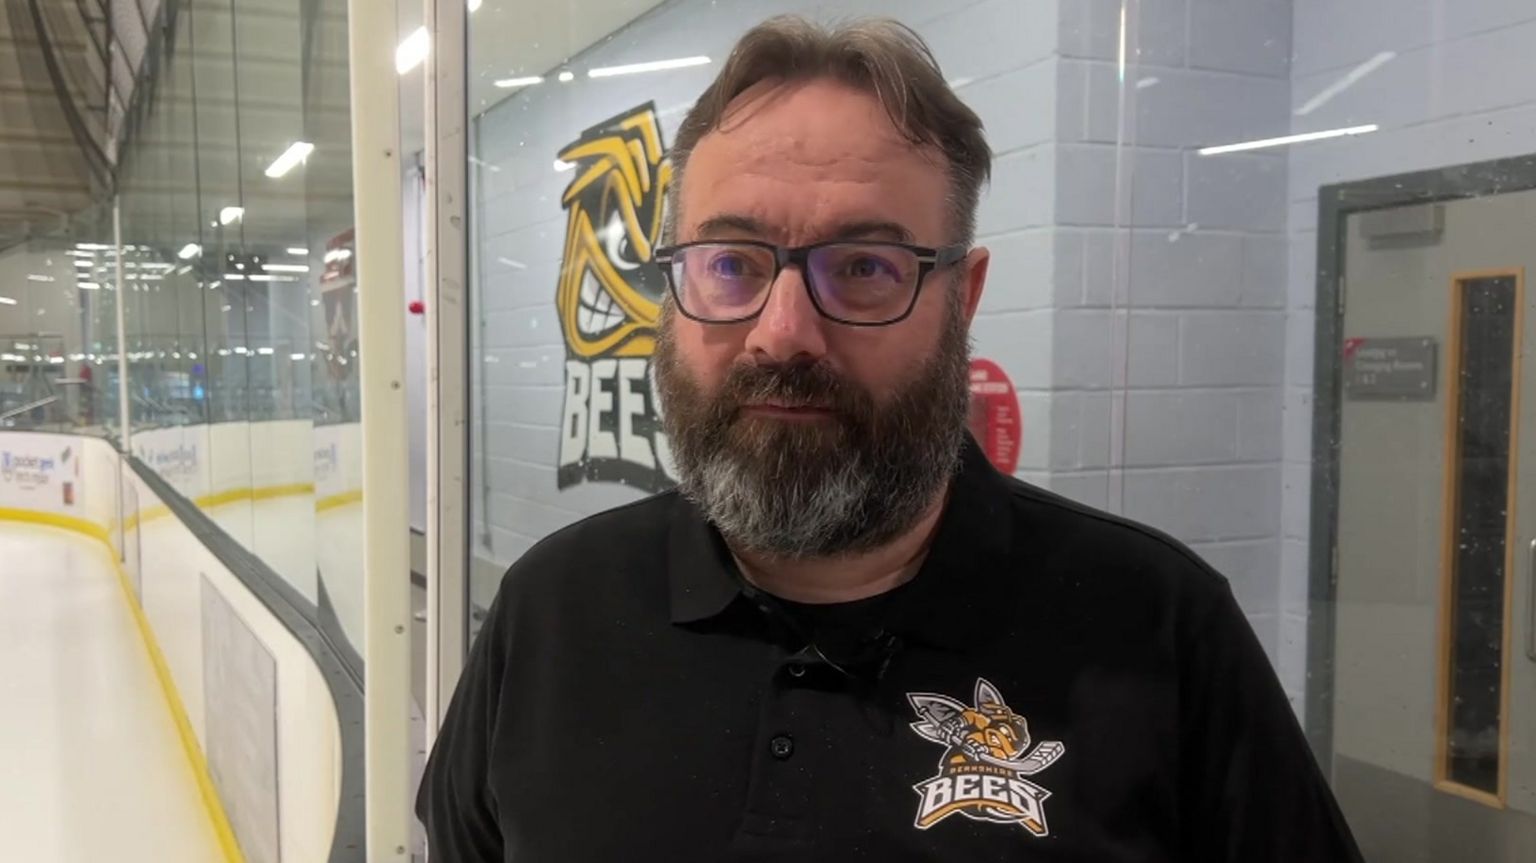 Steve Merry has dark, curtained hair, dark glasses, and a dark beard with flecks of white. He is also wearing a Berkshire Bees branded T-shirt 